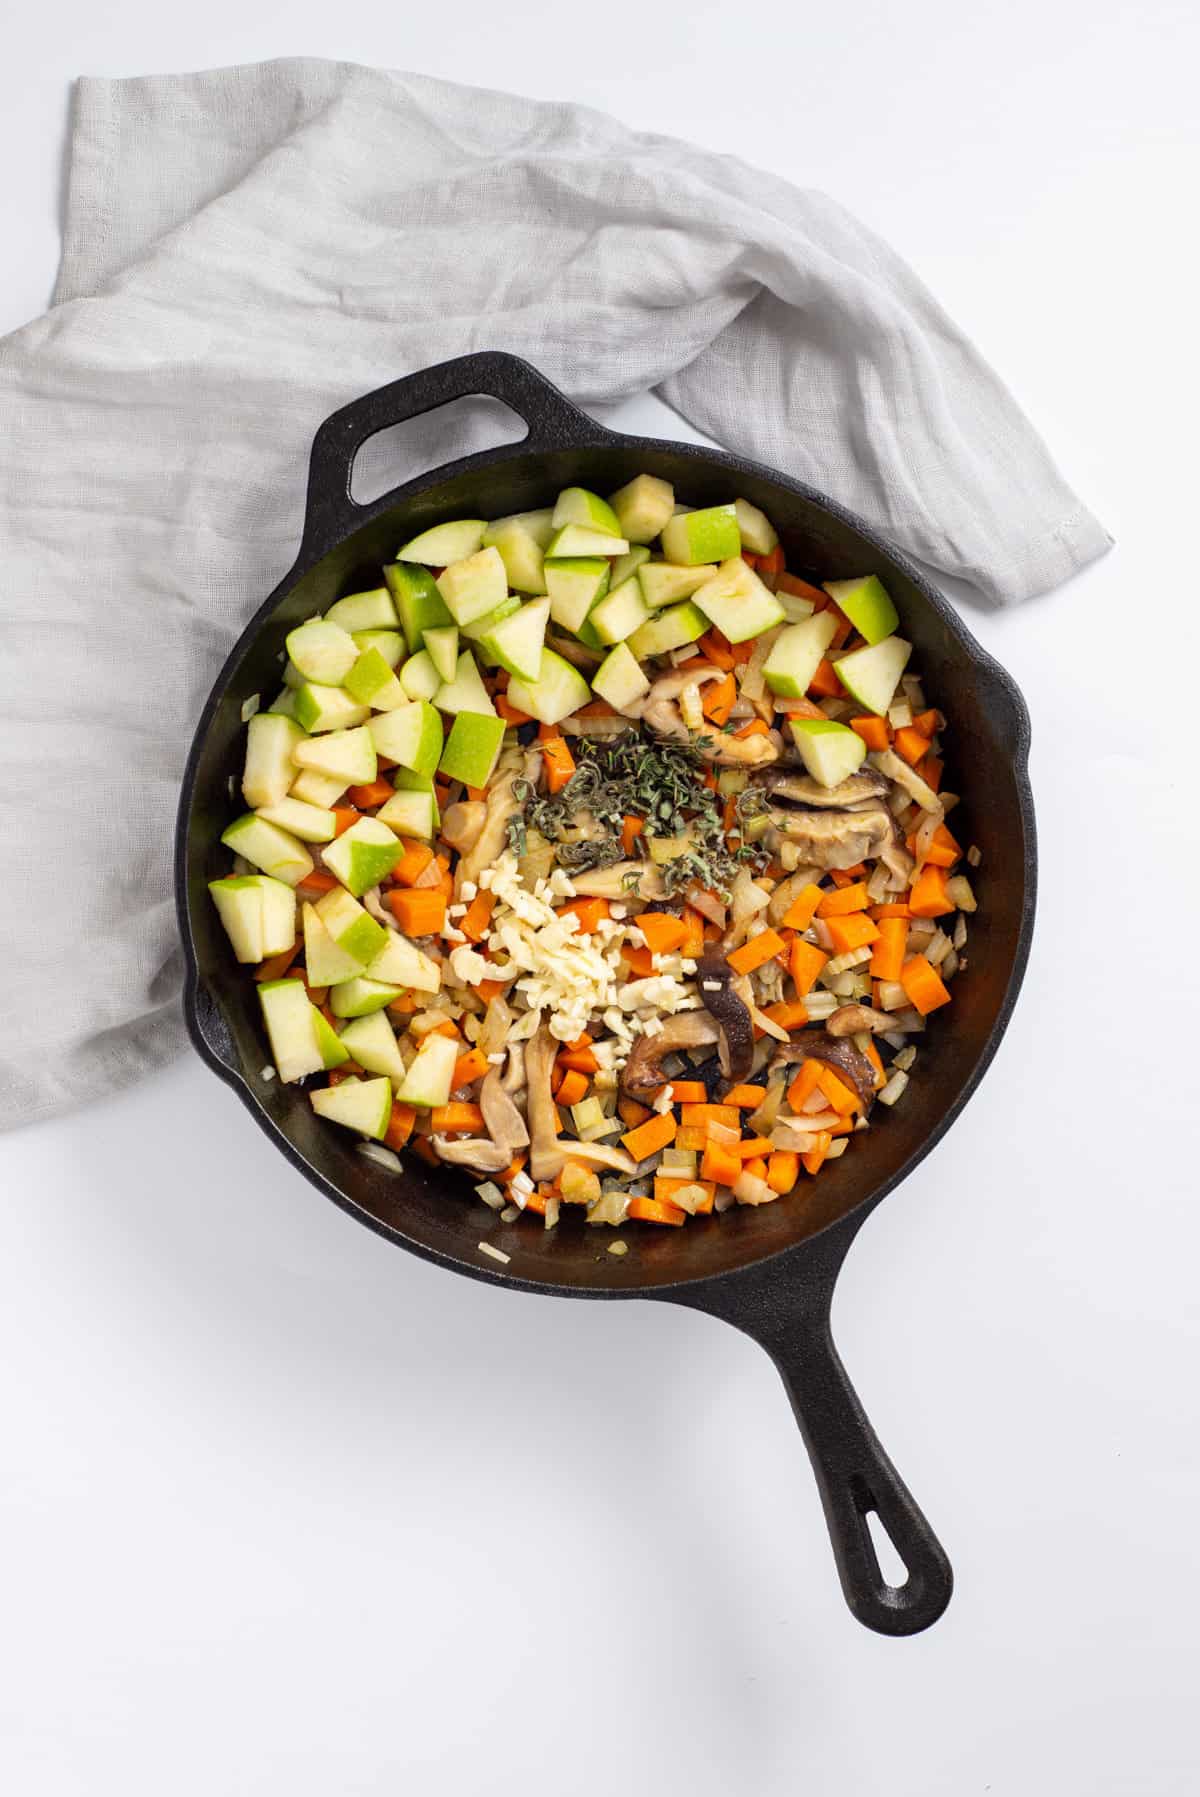 Overhead view of skillet with apples, herbs added in.